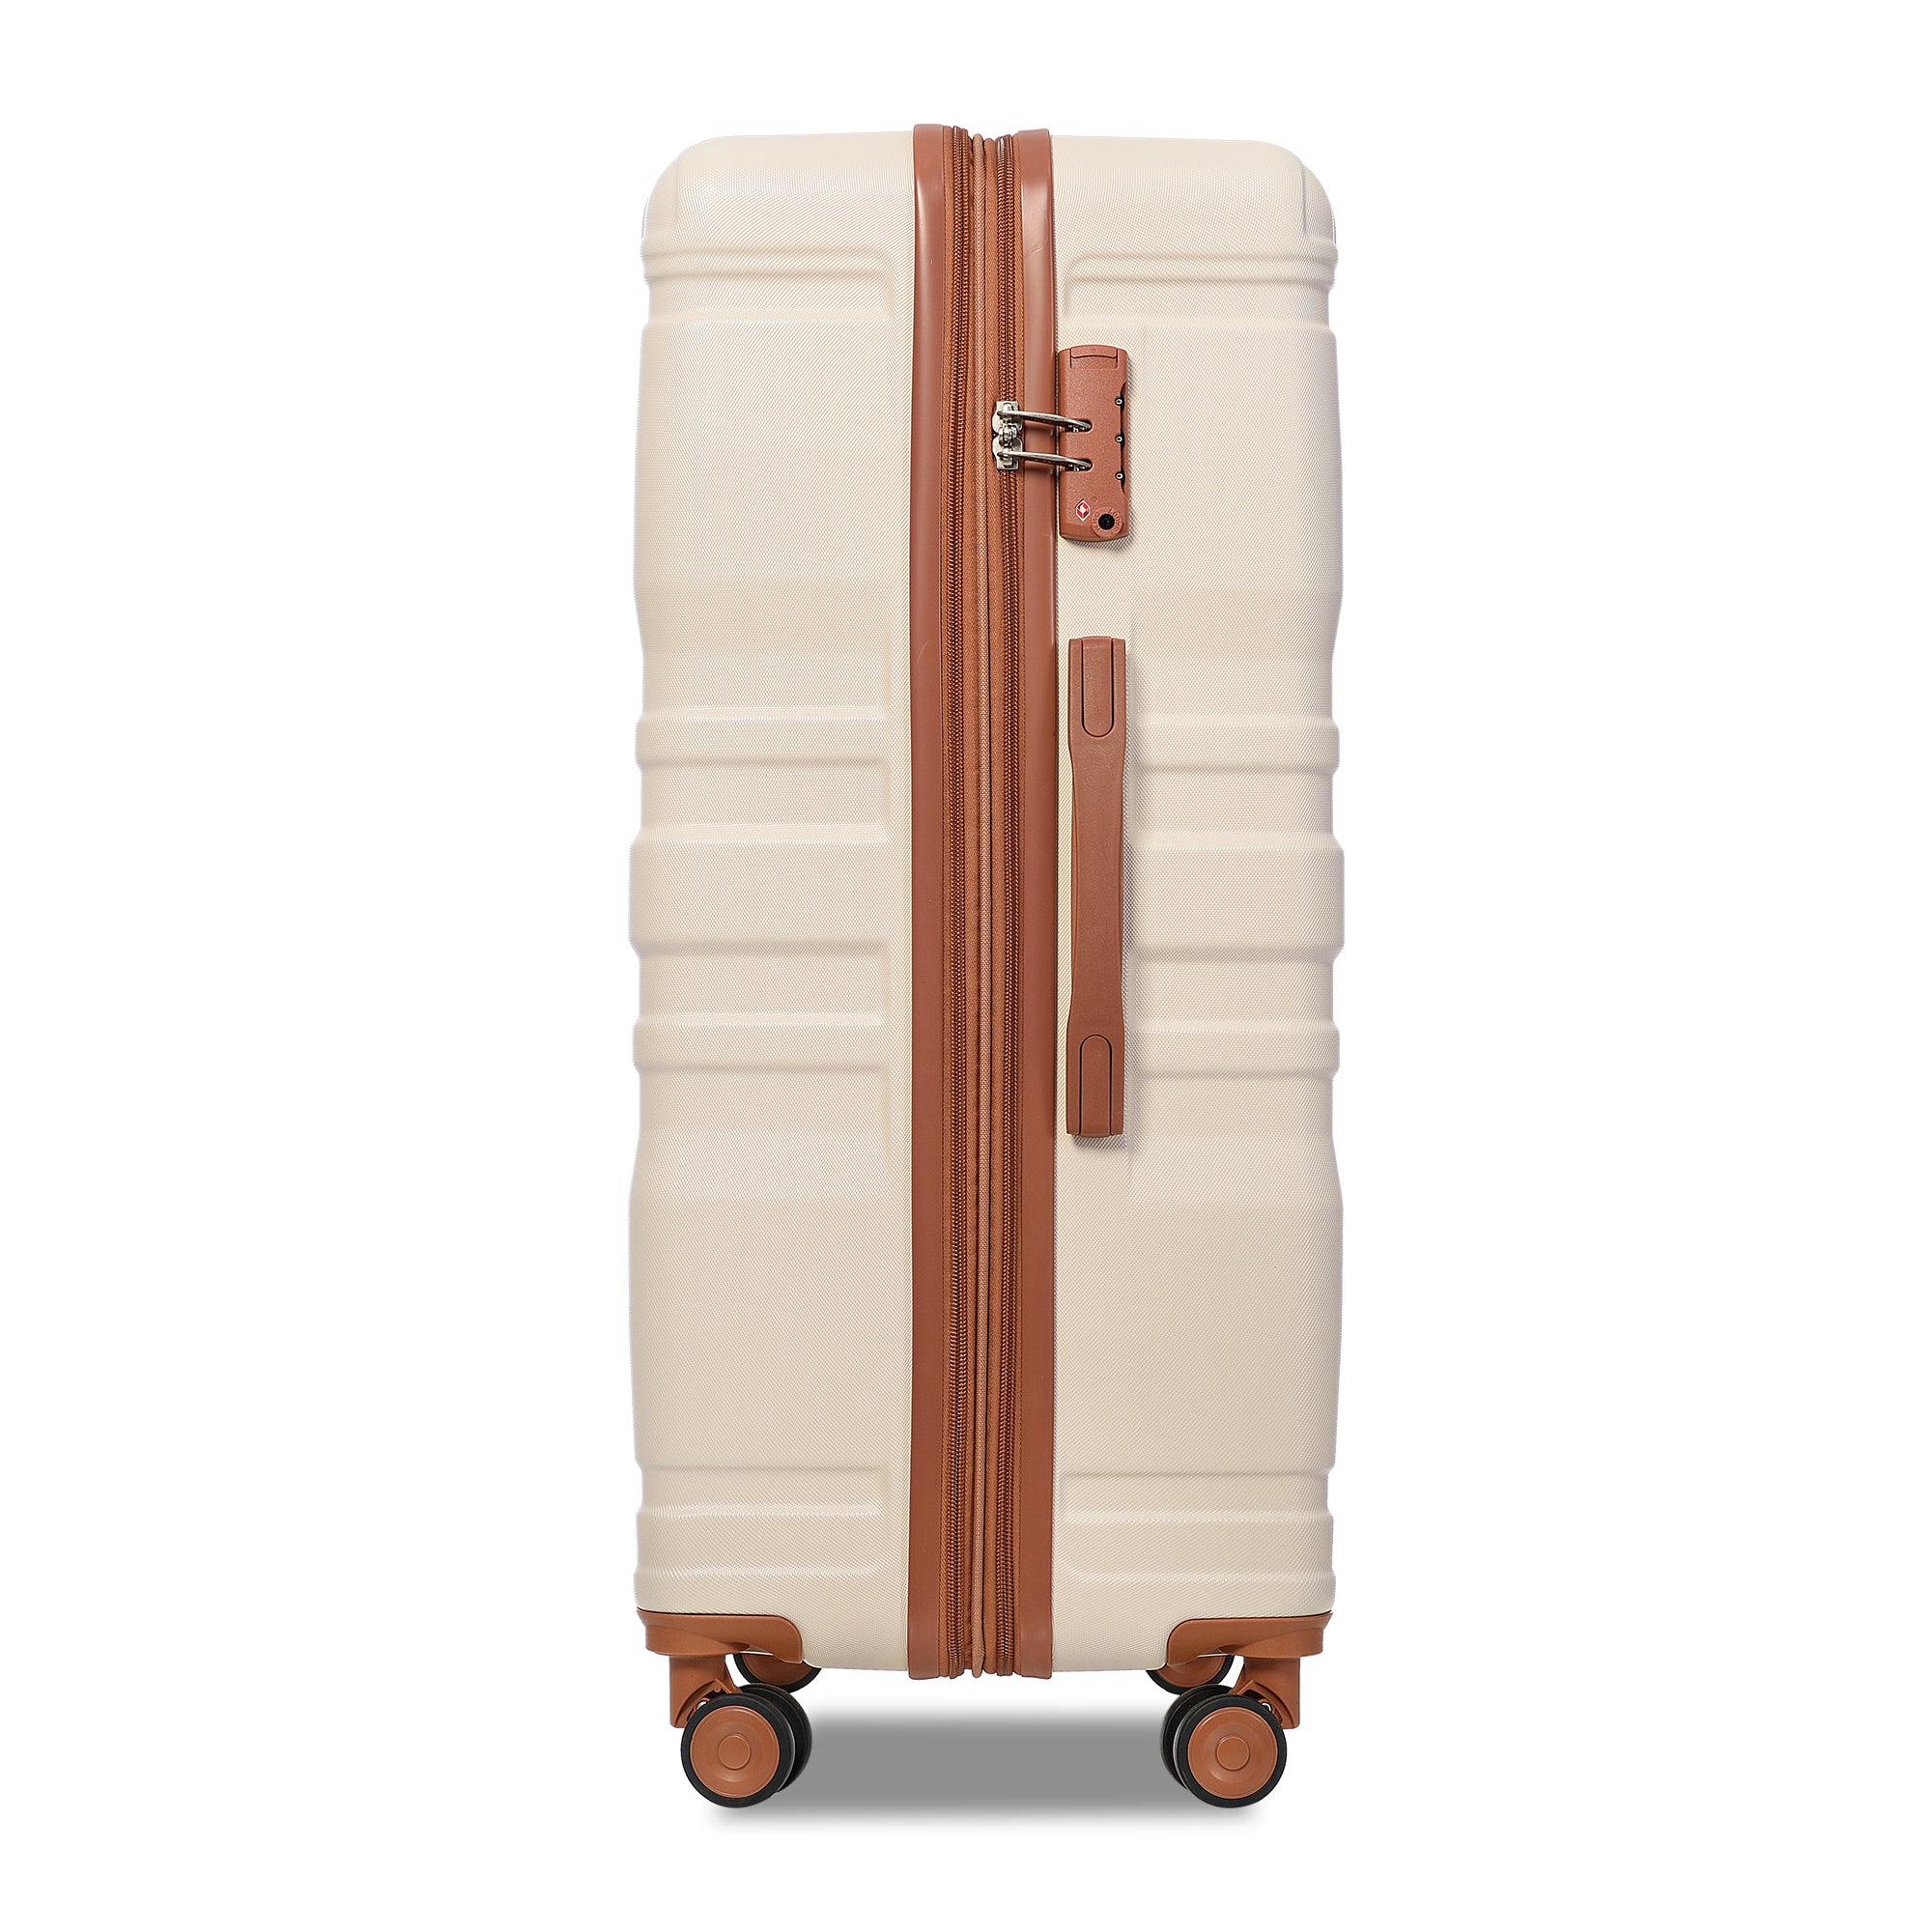 Luggage Sets 4 Piece, Expandable ABS Durable Suitcase beige+brown-abs